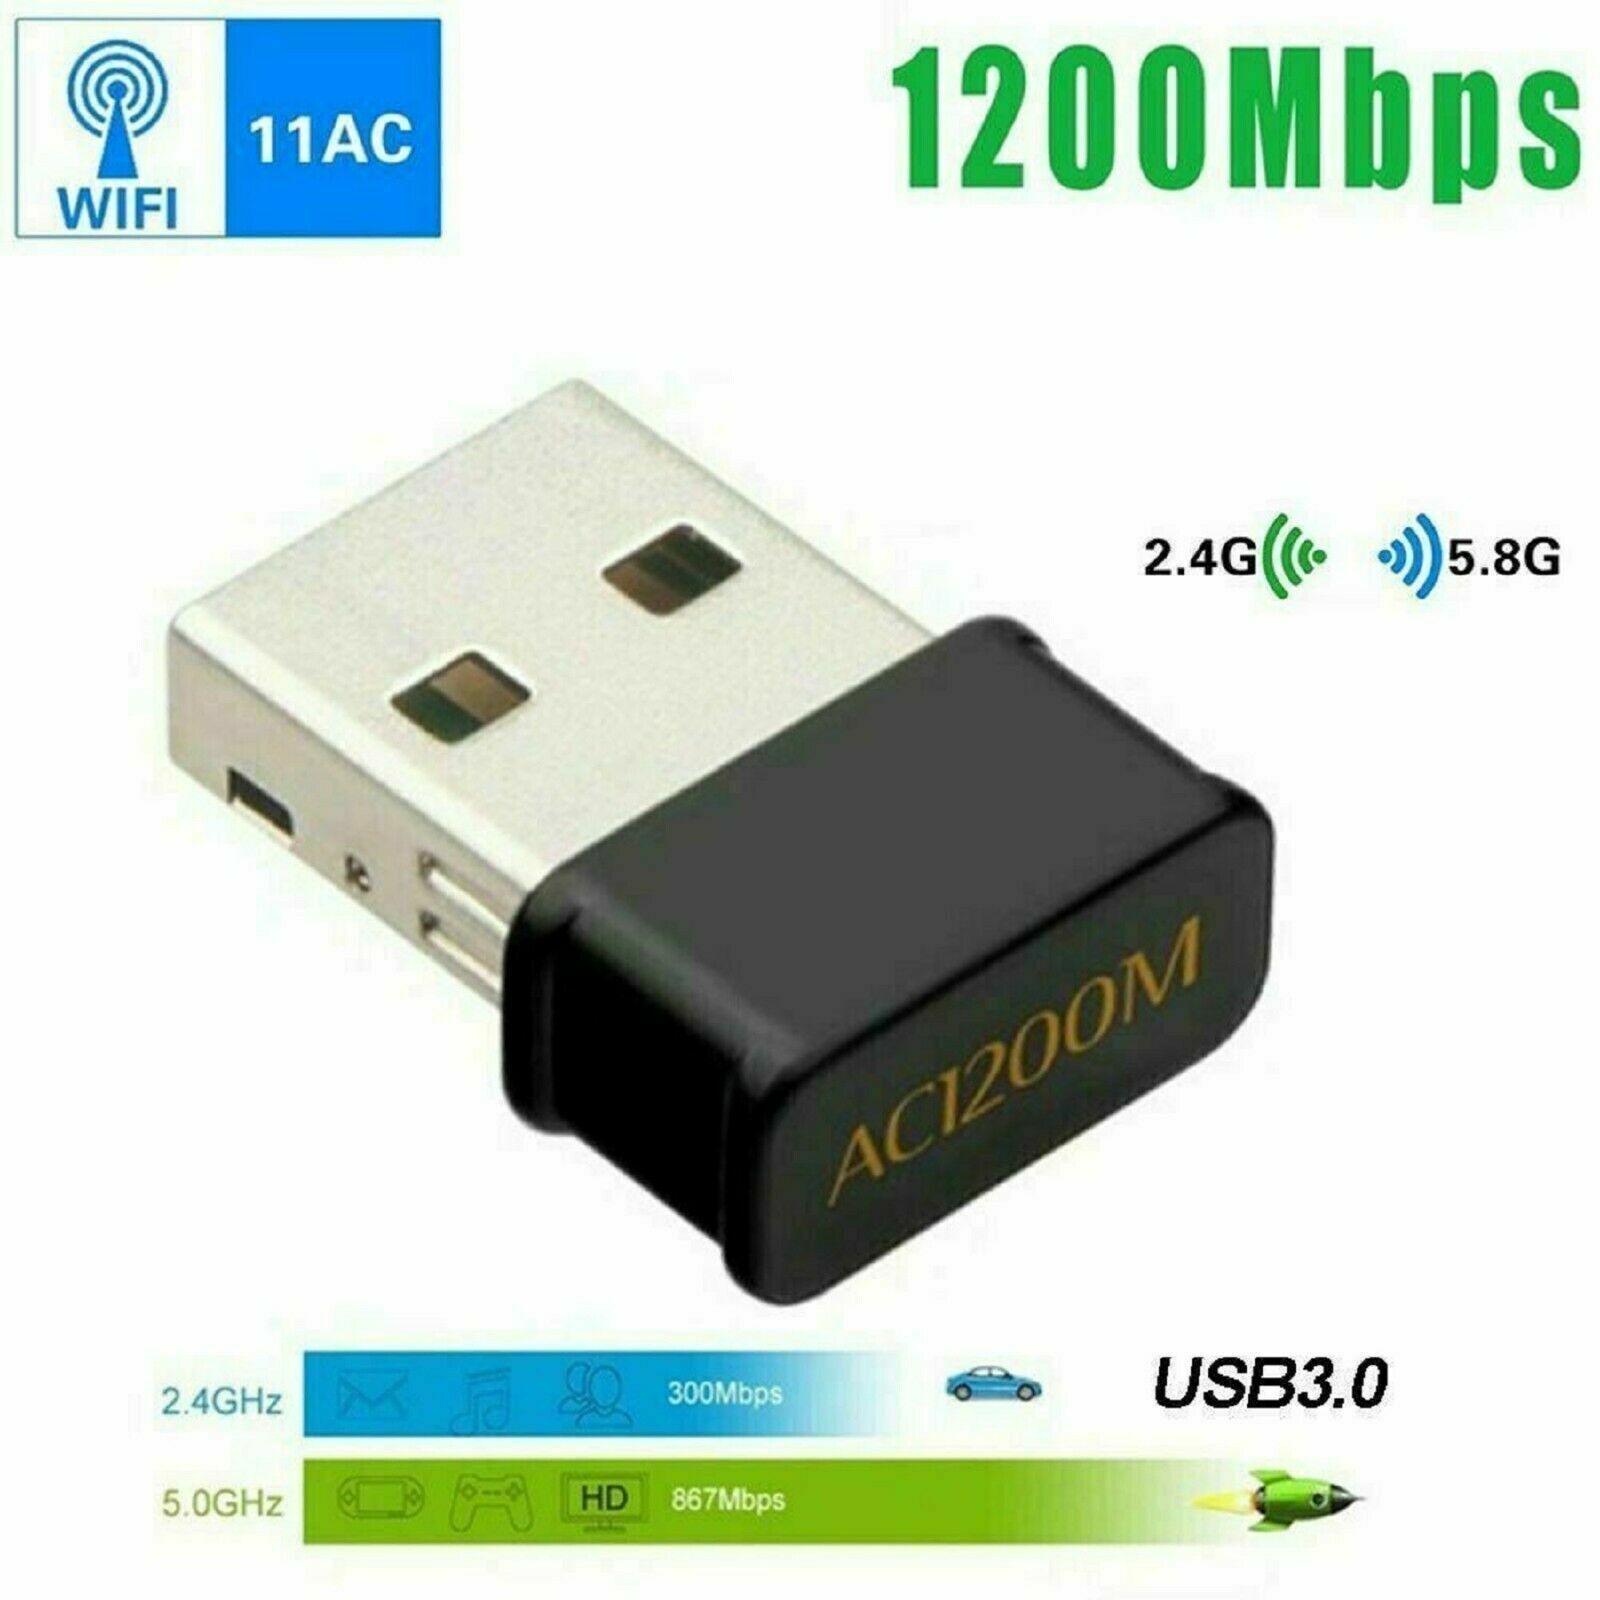 Wireless Lan USB PC WiFi Adapter Network 802.11AC 1200Mbps Dual Band 2.4G / 5G